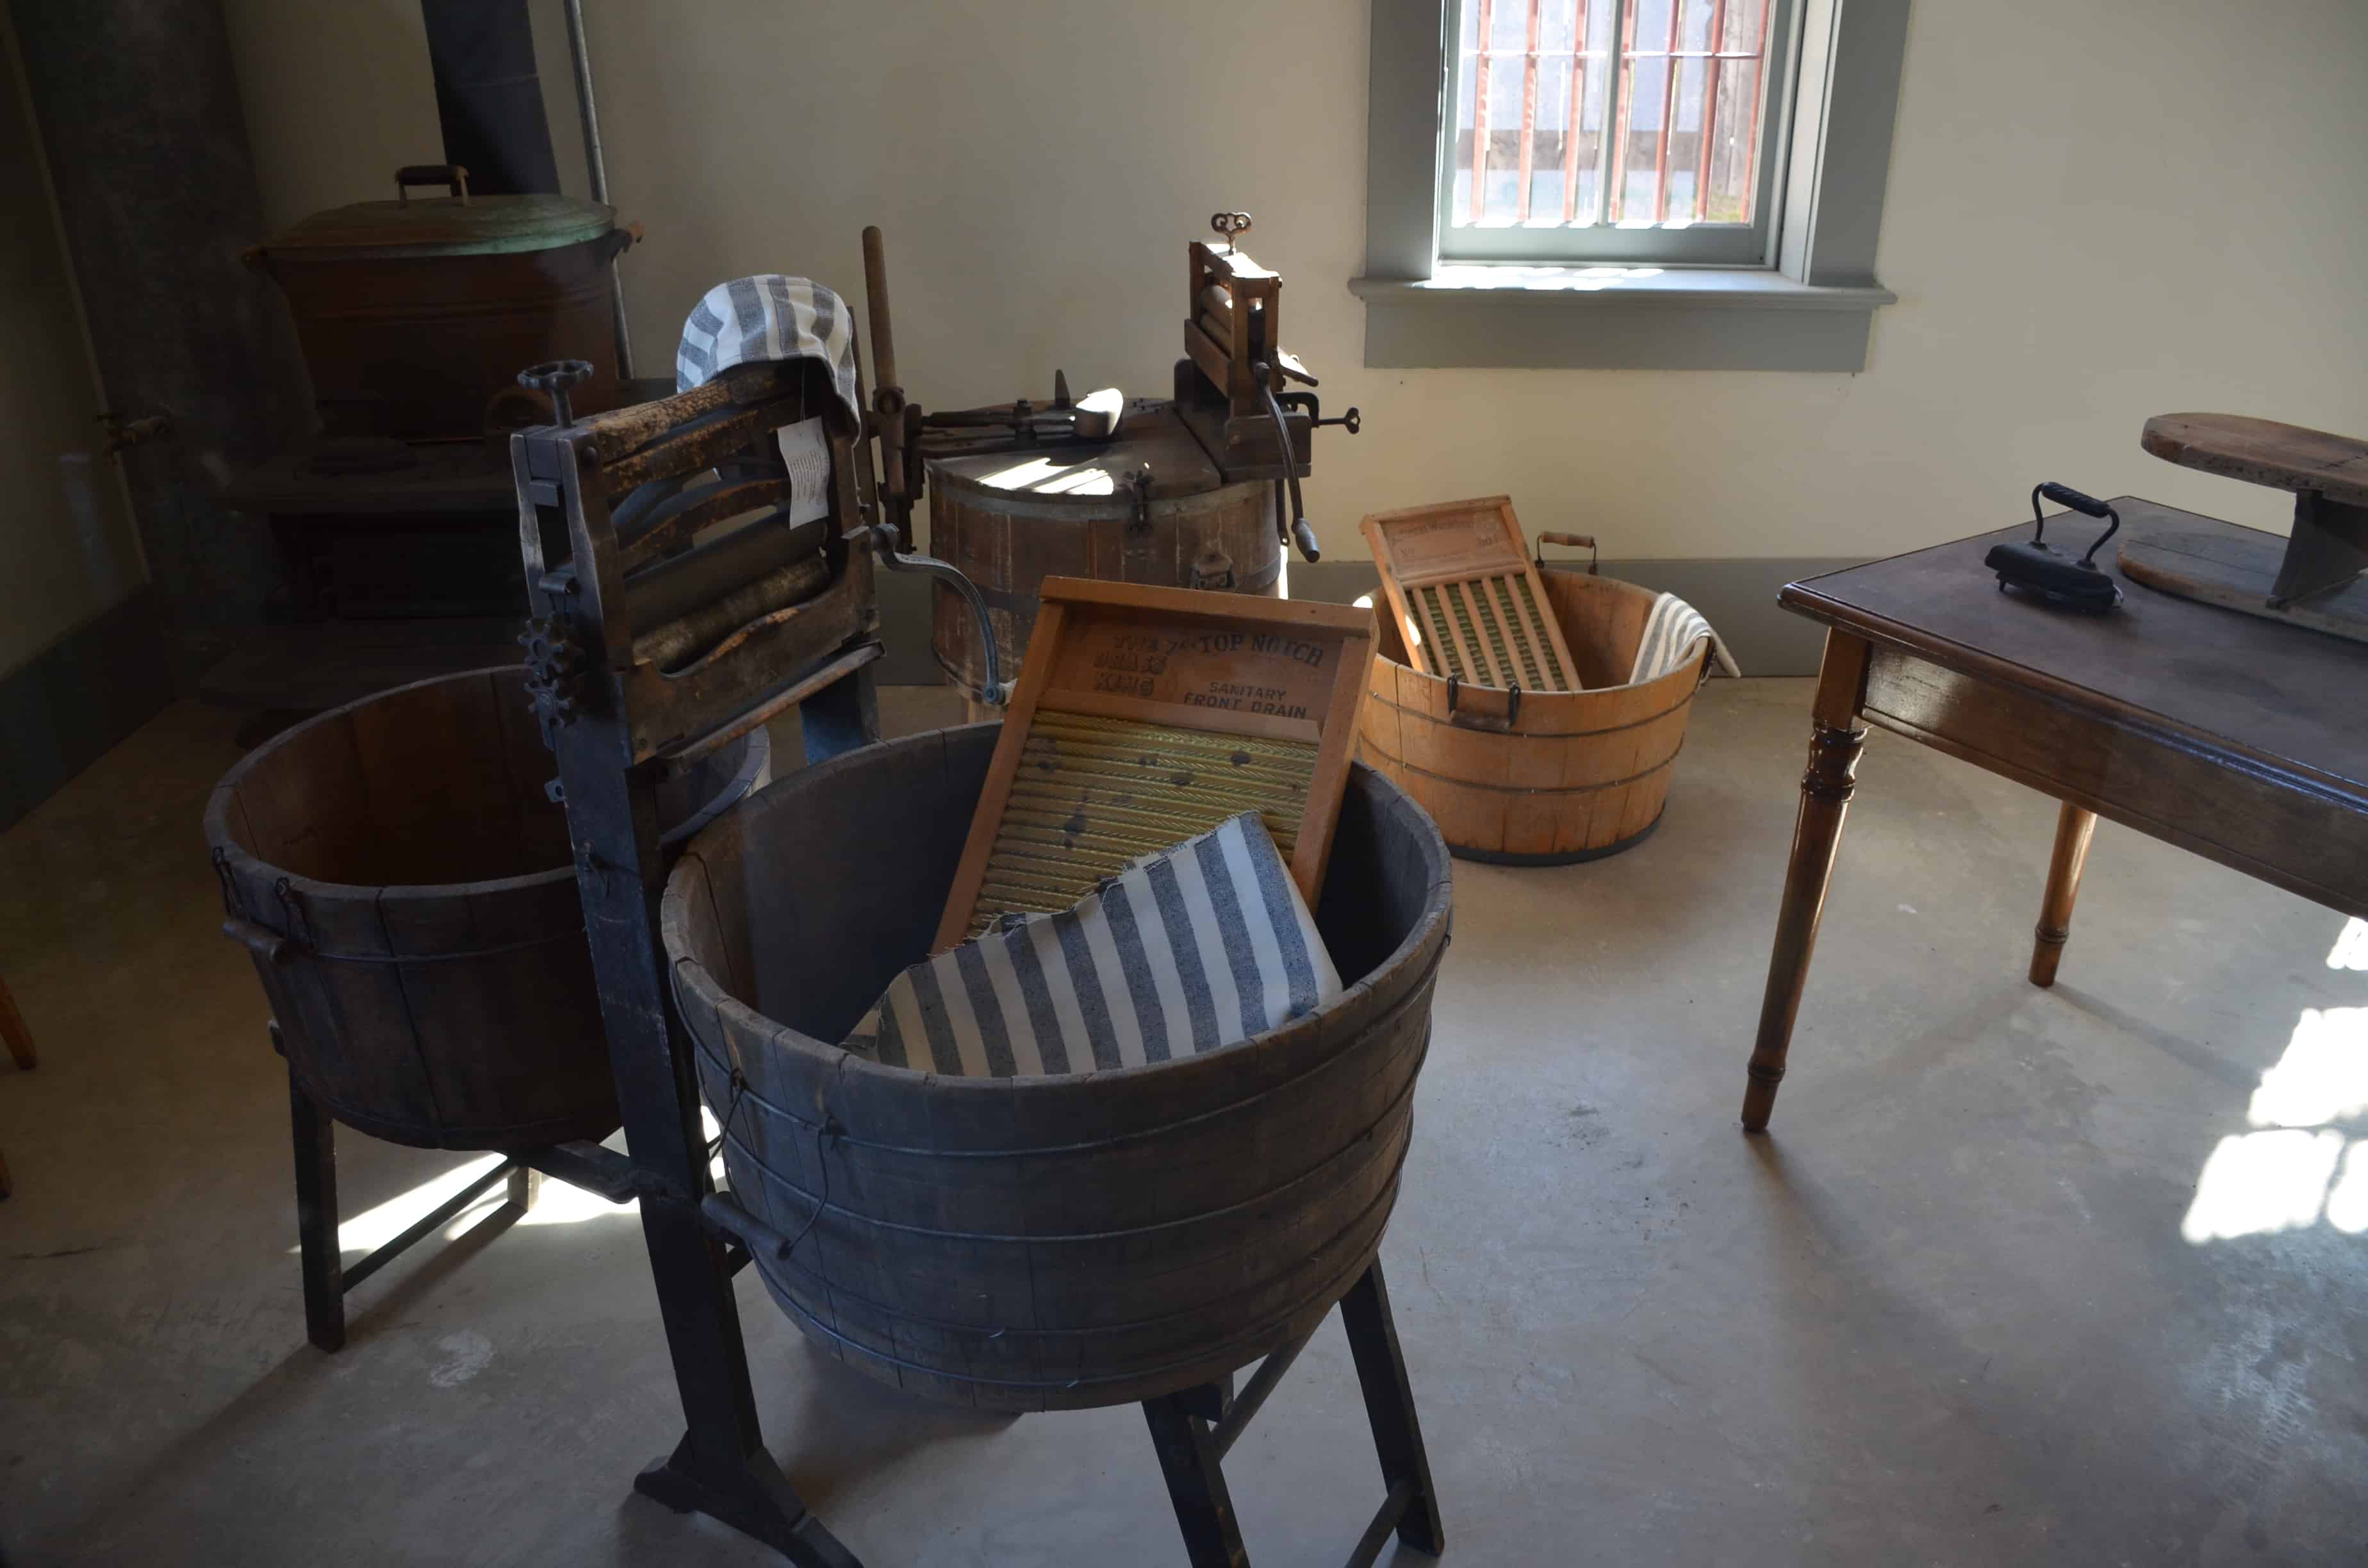 Laundry room at Wyoming Territorial Prison State Historic Site in Laramie